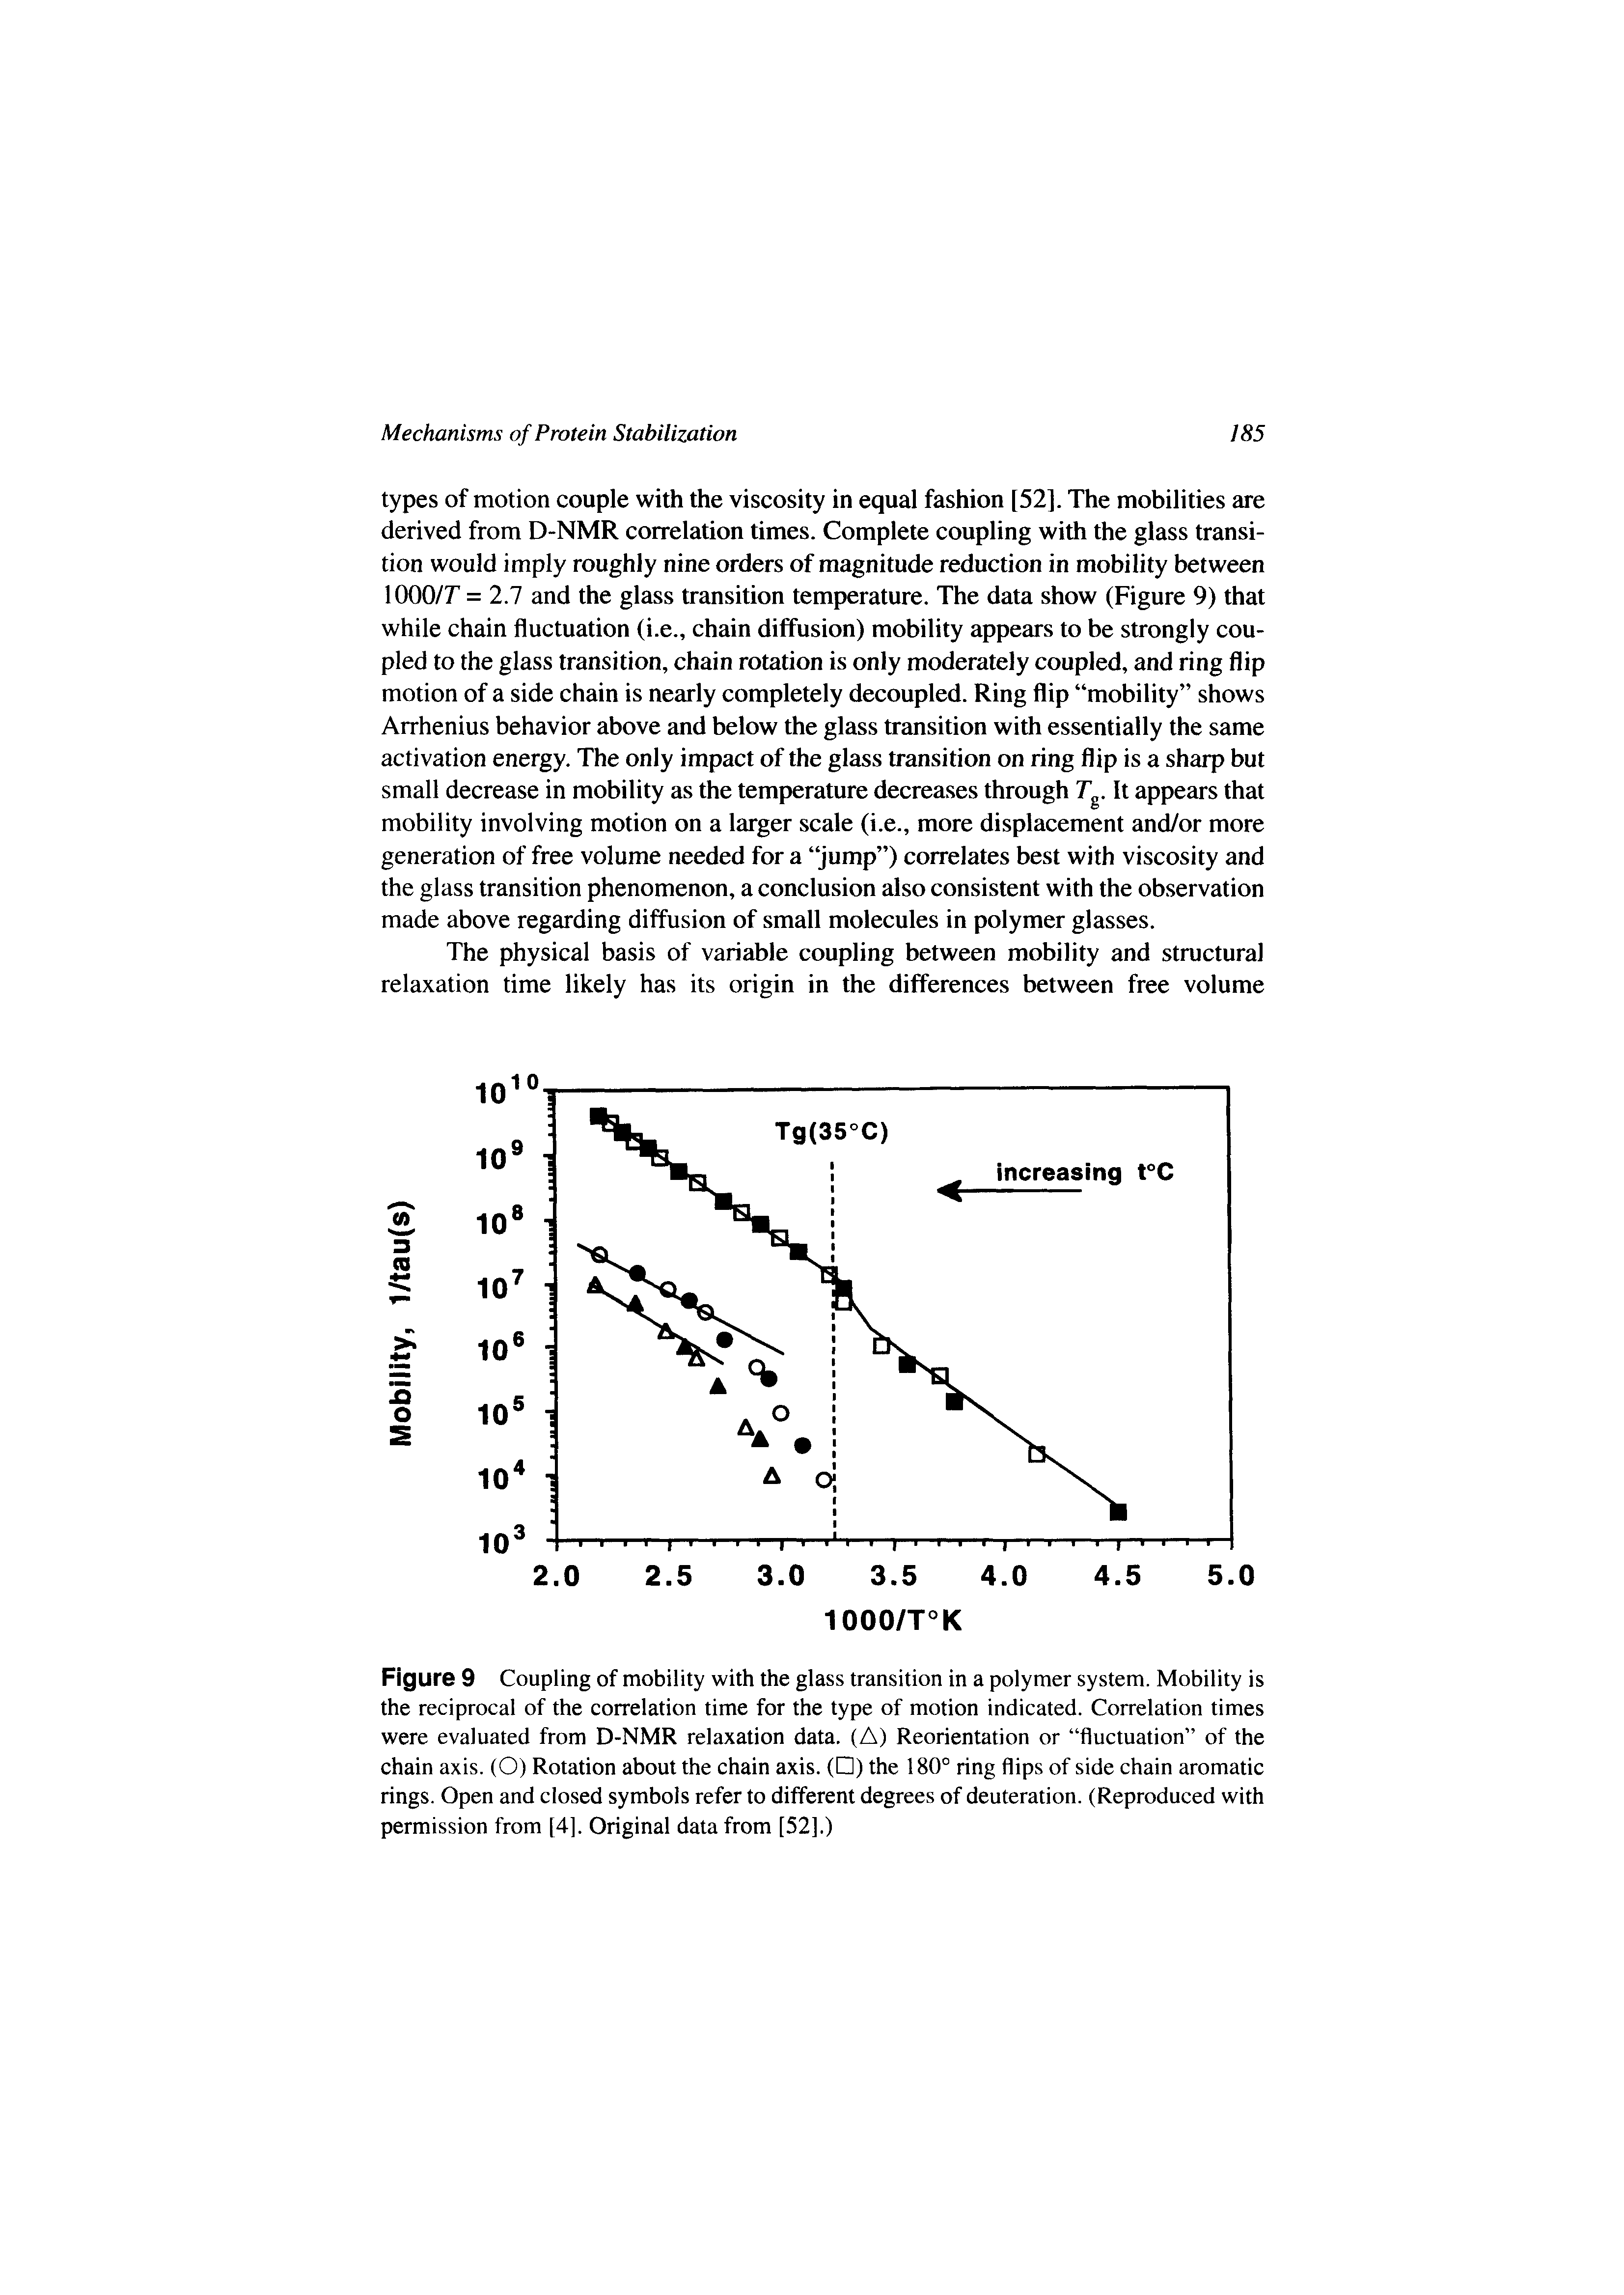 Figure 9 Coupling of mobility with the glass transition in a polymer system. Mobility is the reciprocal of the correlation time for the type of motion indicated. Correlation times were evaluated from D-NMR relaxation data. (A) Reorientation or fluctuation of the chain axis. (O) Rotation about the chain axis. ( ) the 180° ring flips of side chain aromatic rings. Open and closed symbols refer to different degrees of deuteration. (Reproduced with permission from [4], Original data from [52].)...